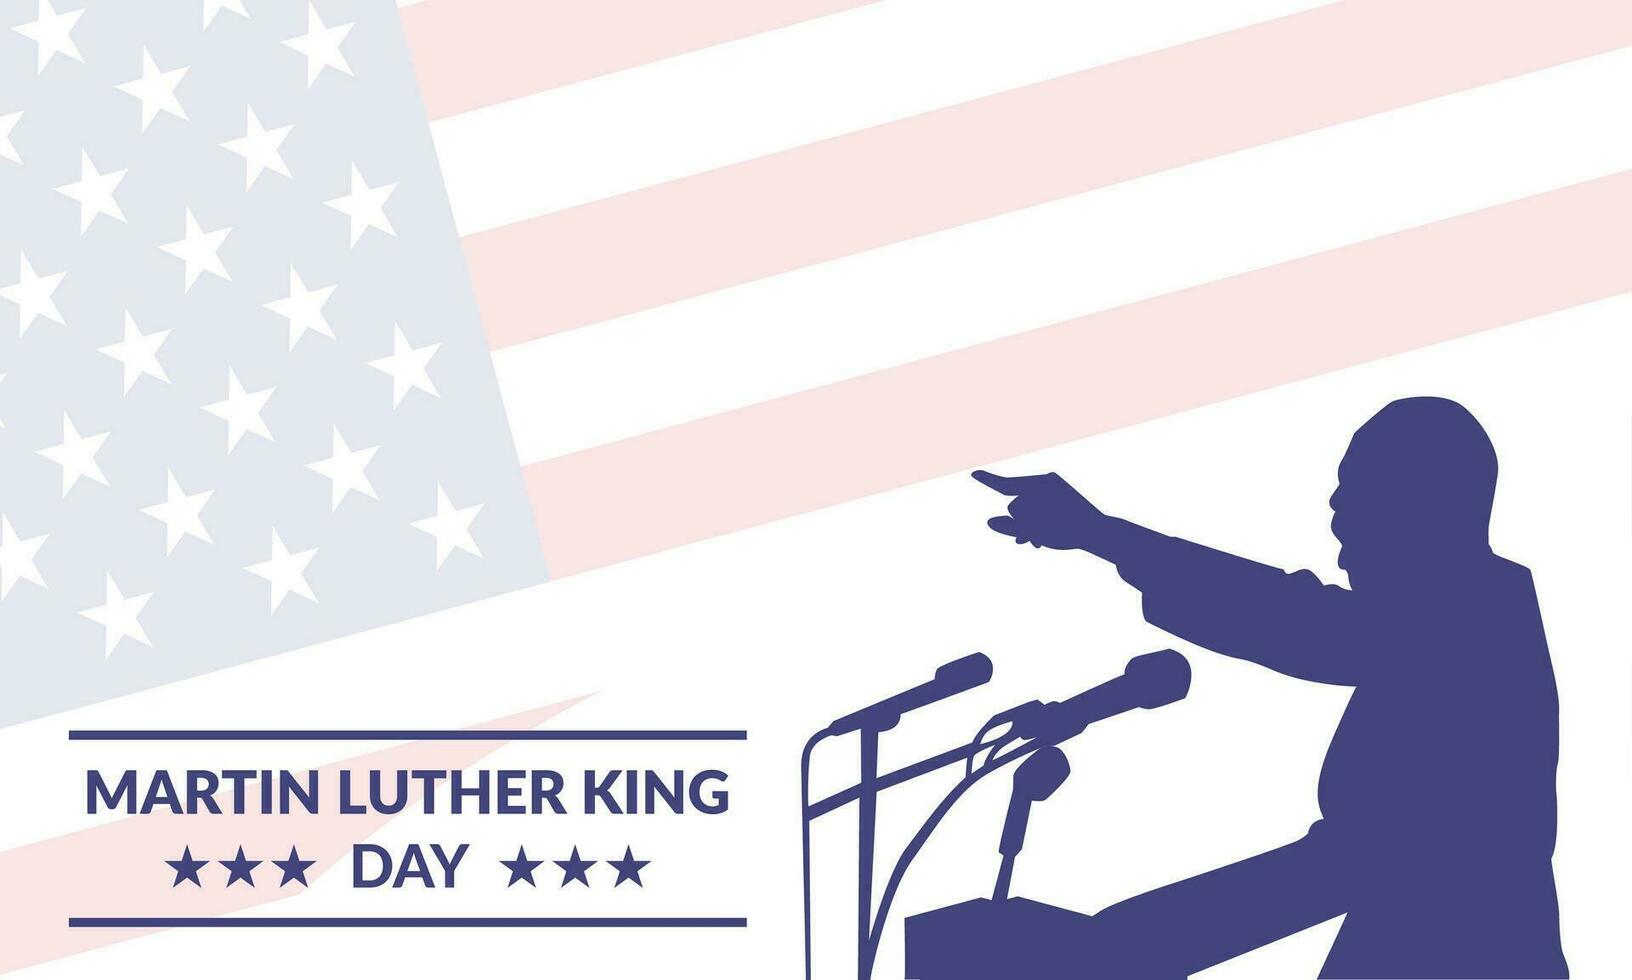 Martin Luther King Day illustrative poster vector